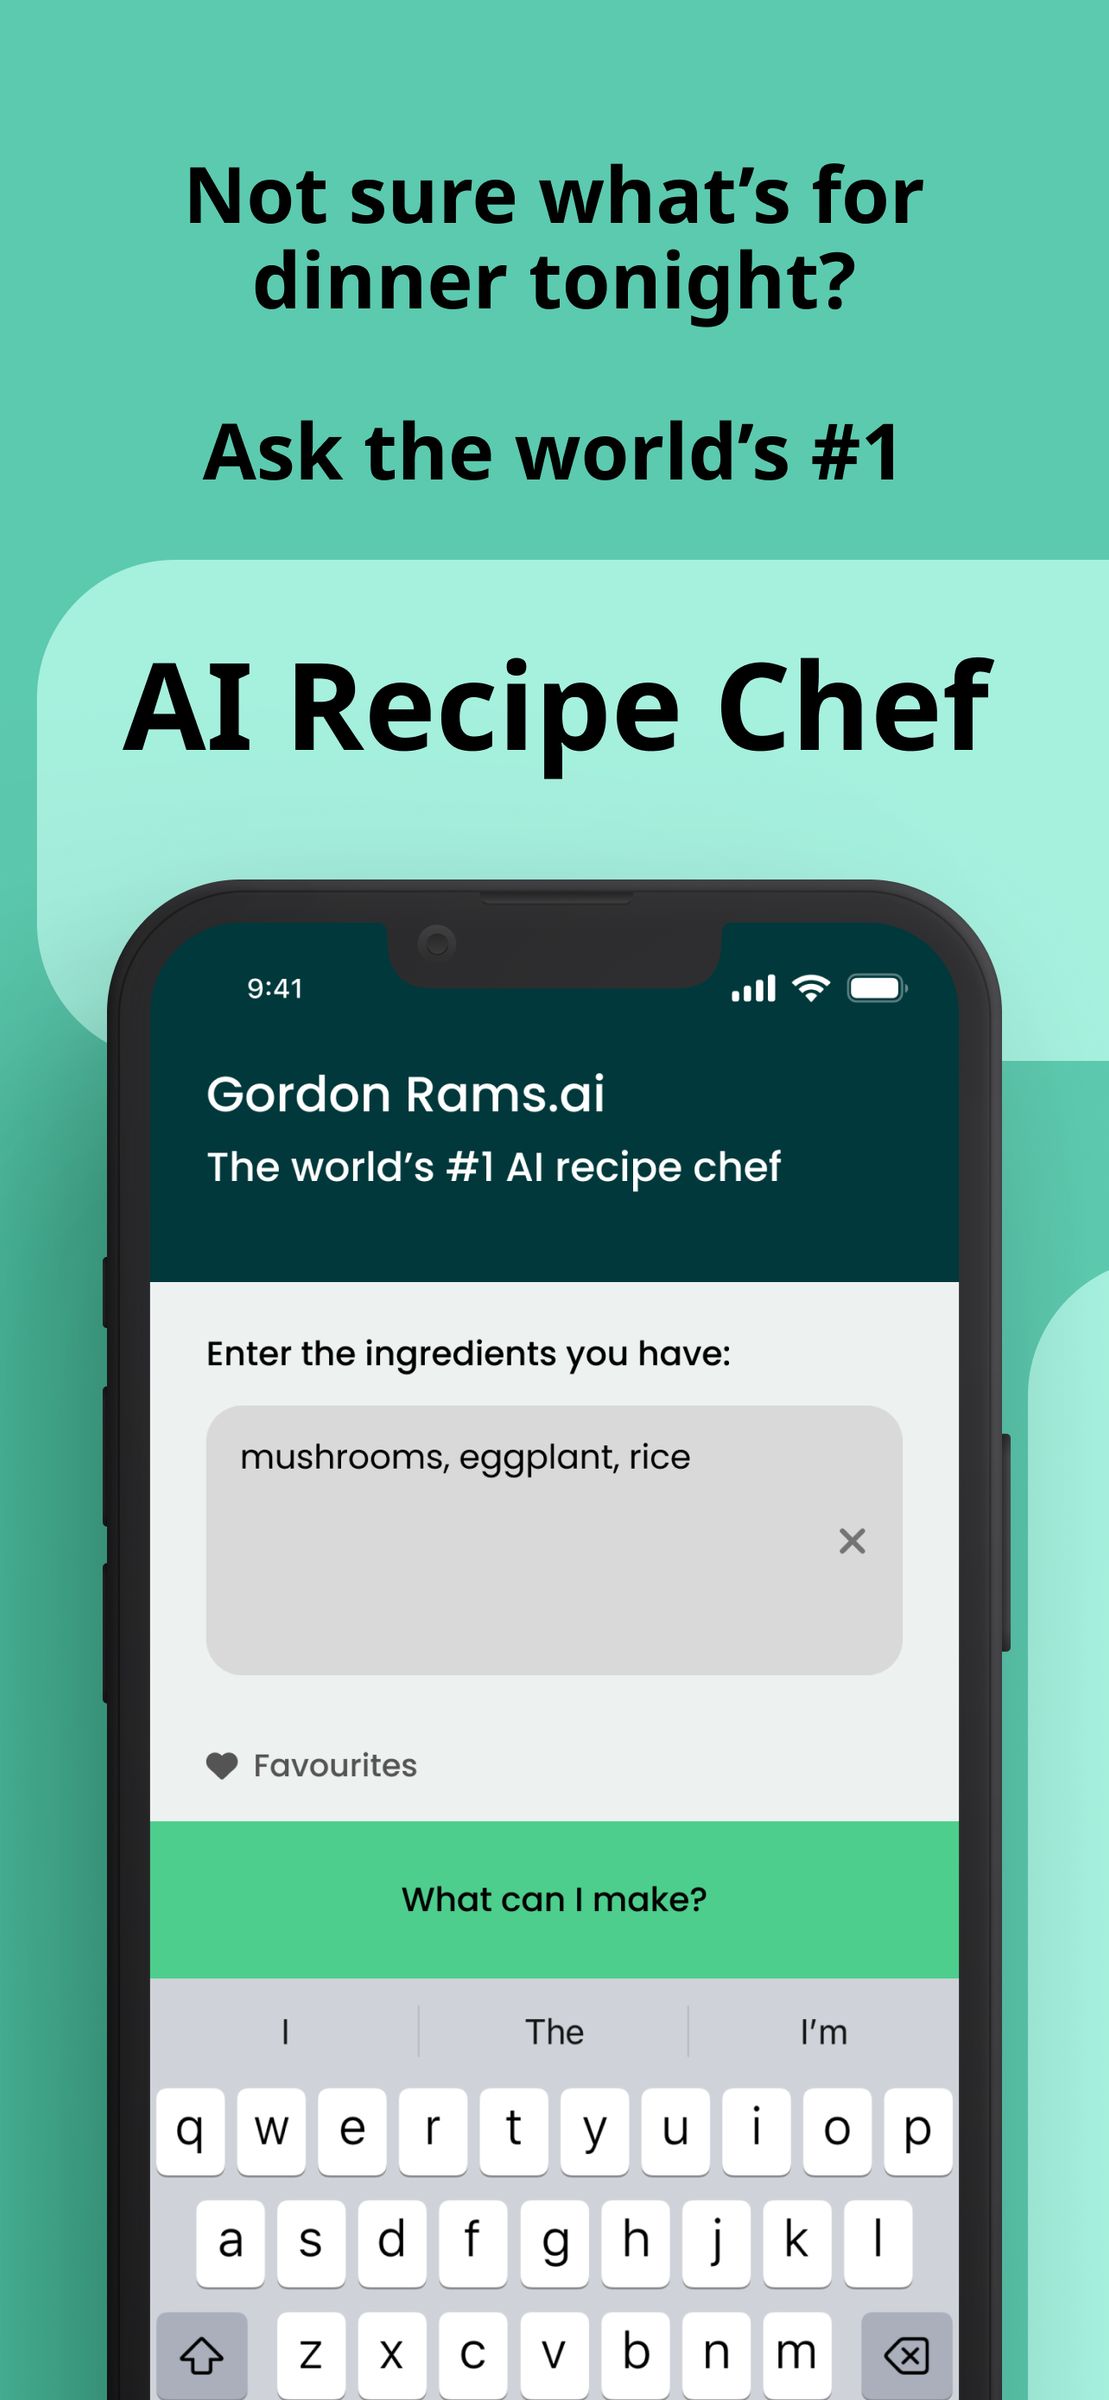 RecipeSage - The Personal Recipe Keeper